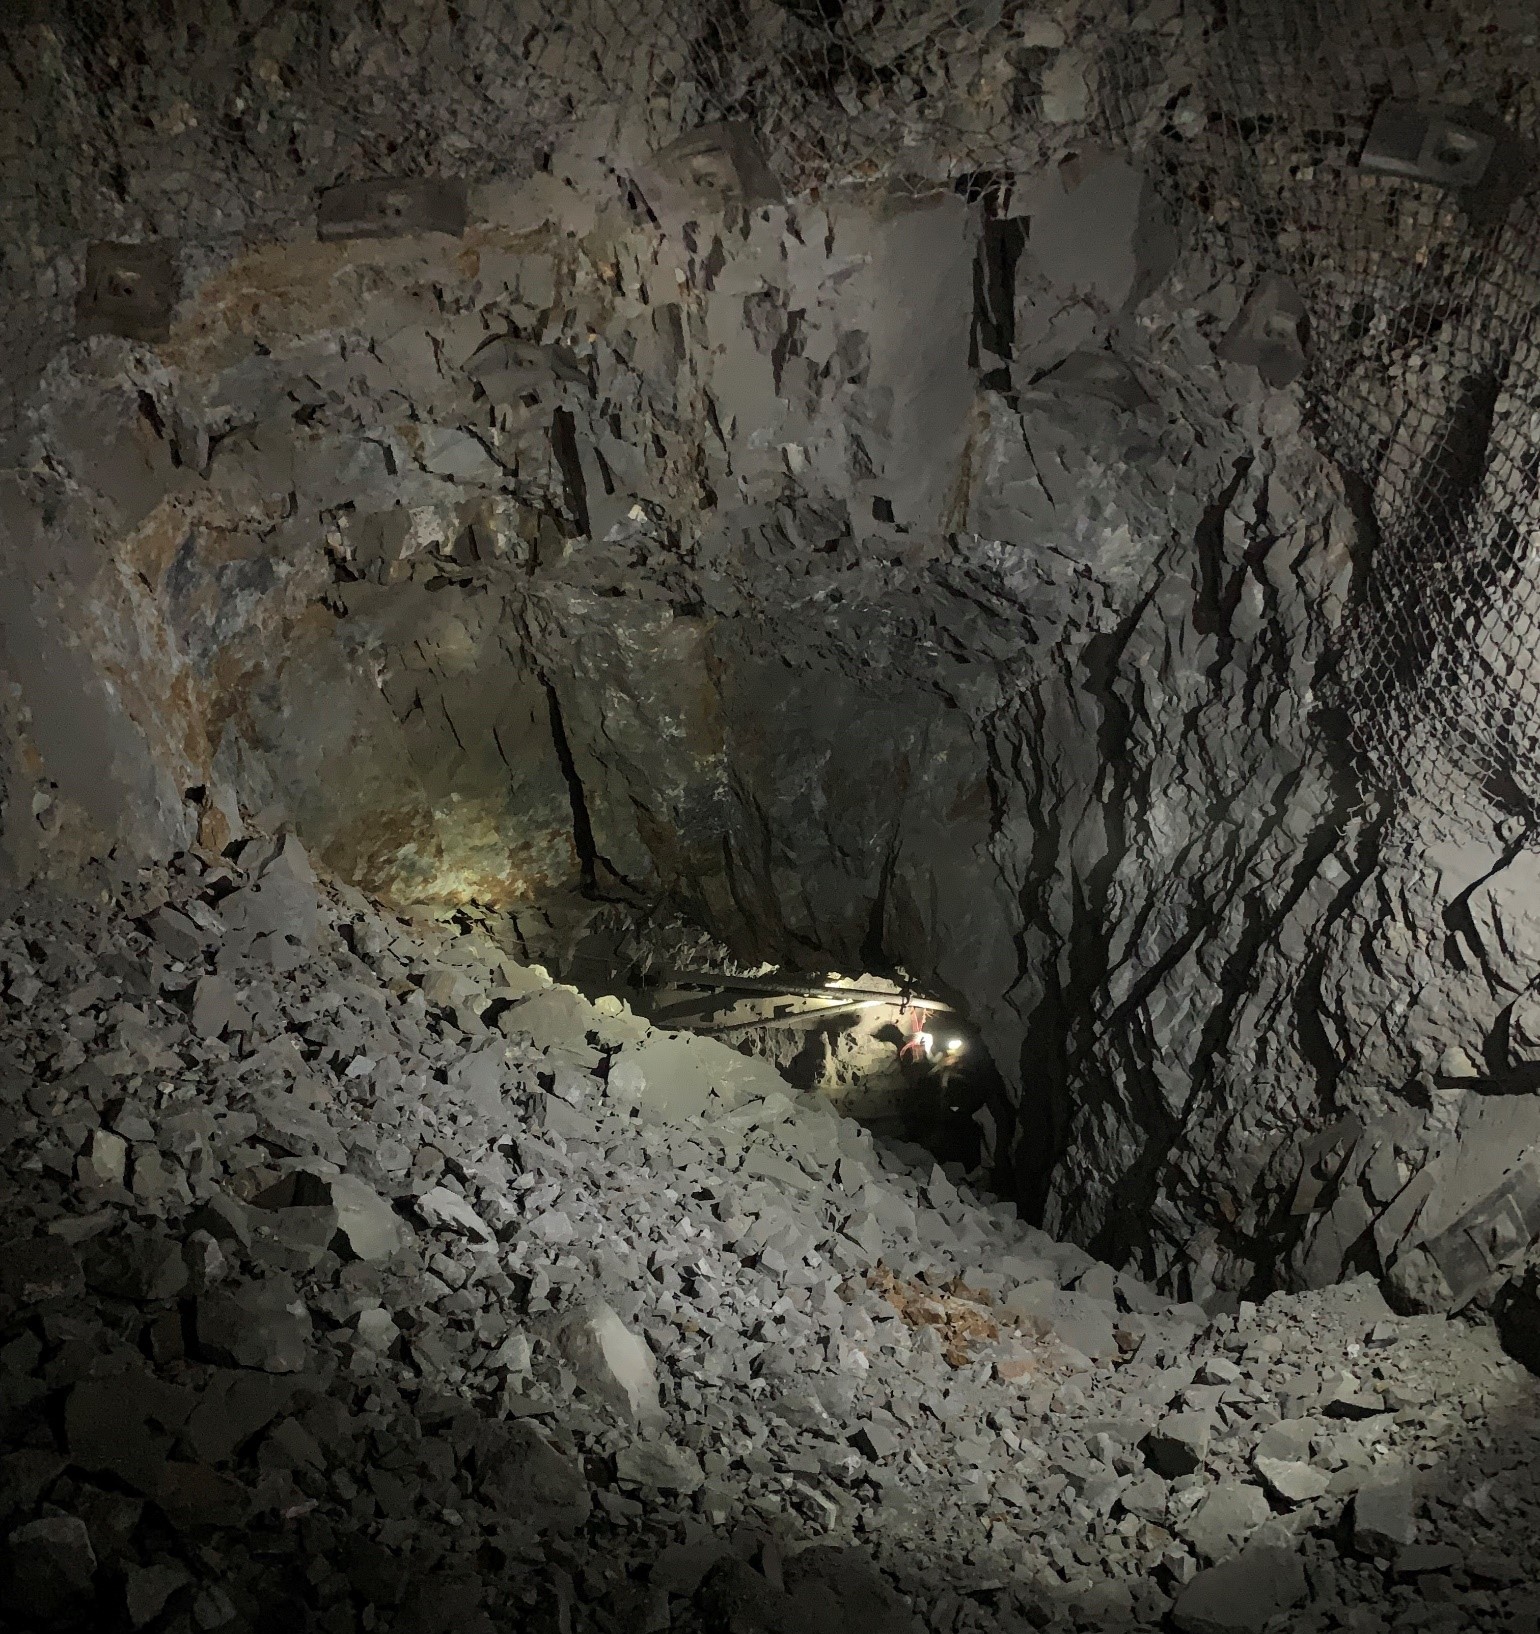 A Miner working in pre-existing infrastructure seen through the initial breakthrough from 5 Level to 6 Level